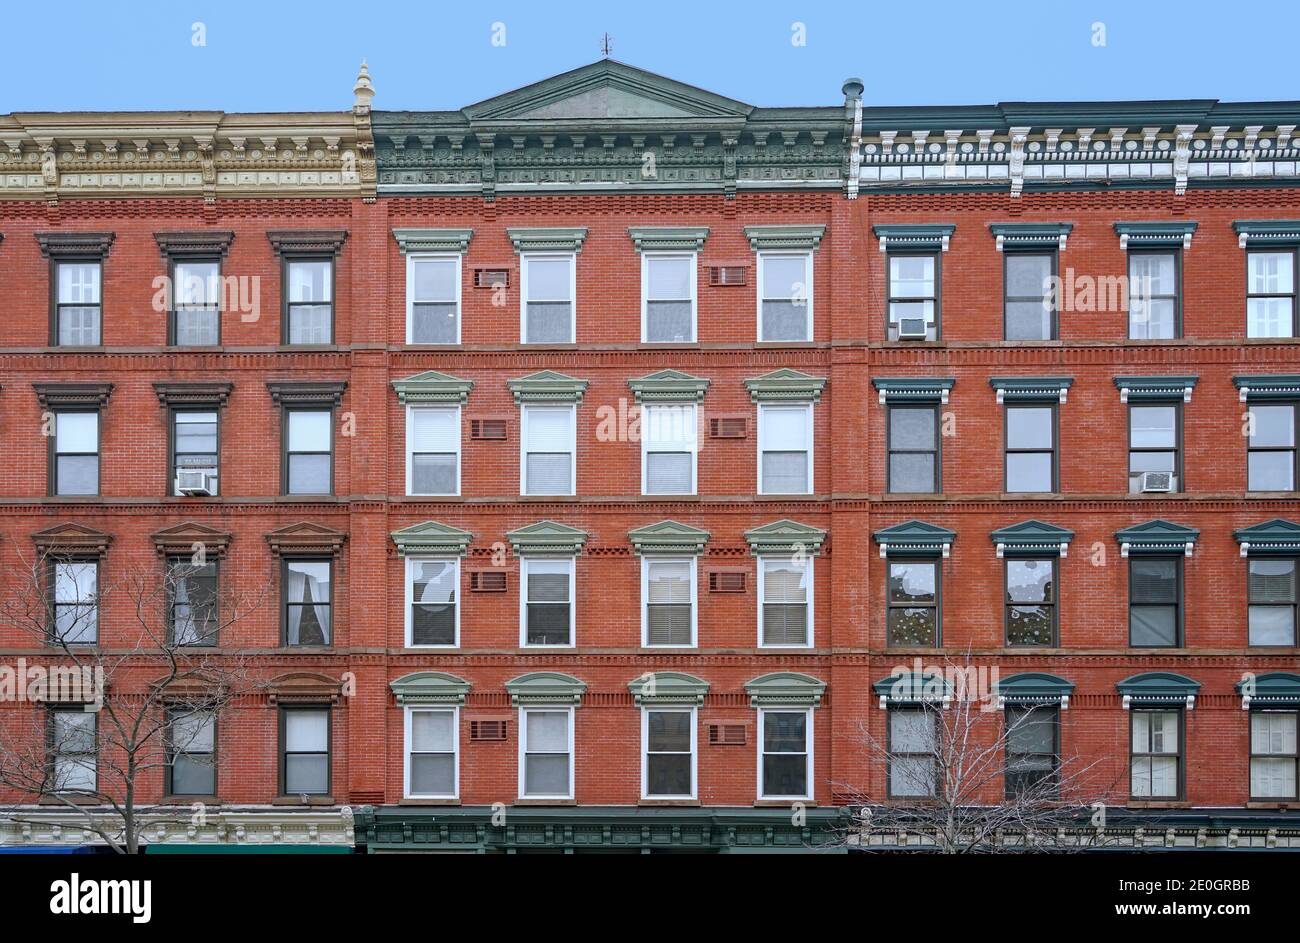 old fashioned apartment building facade with ornate roofline decorations Stock Photo